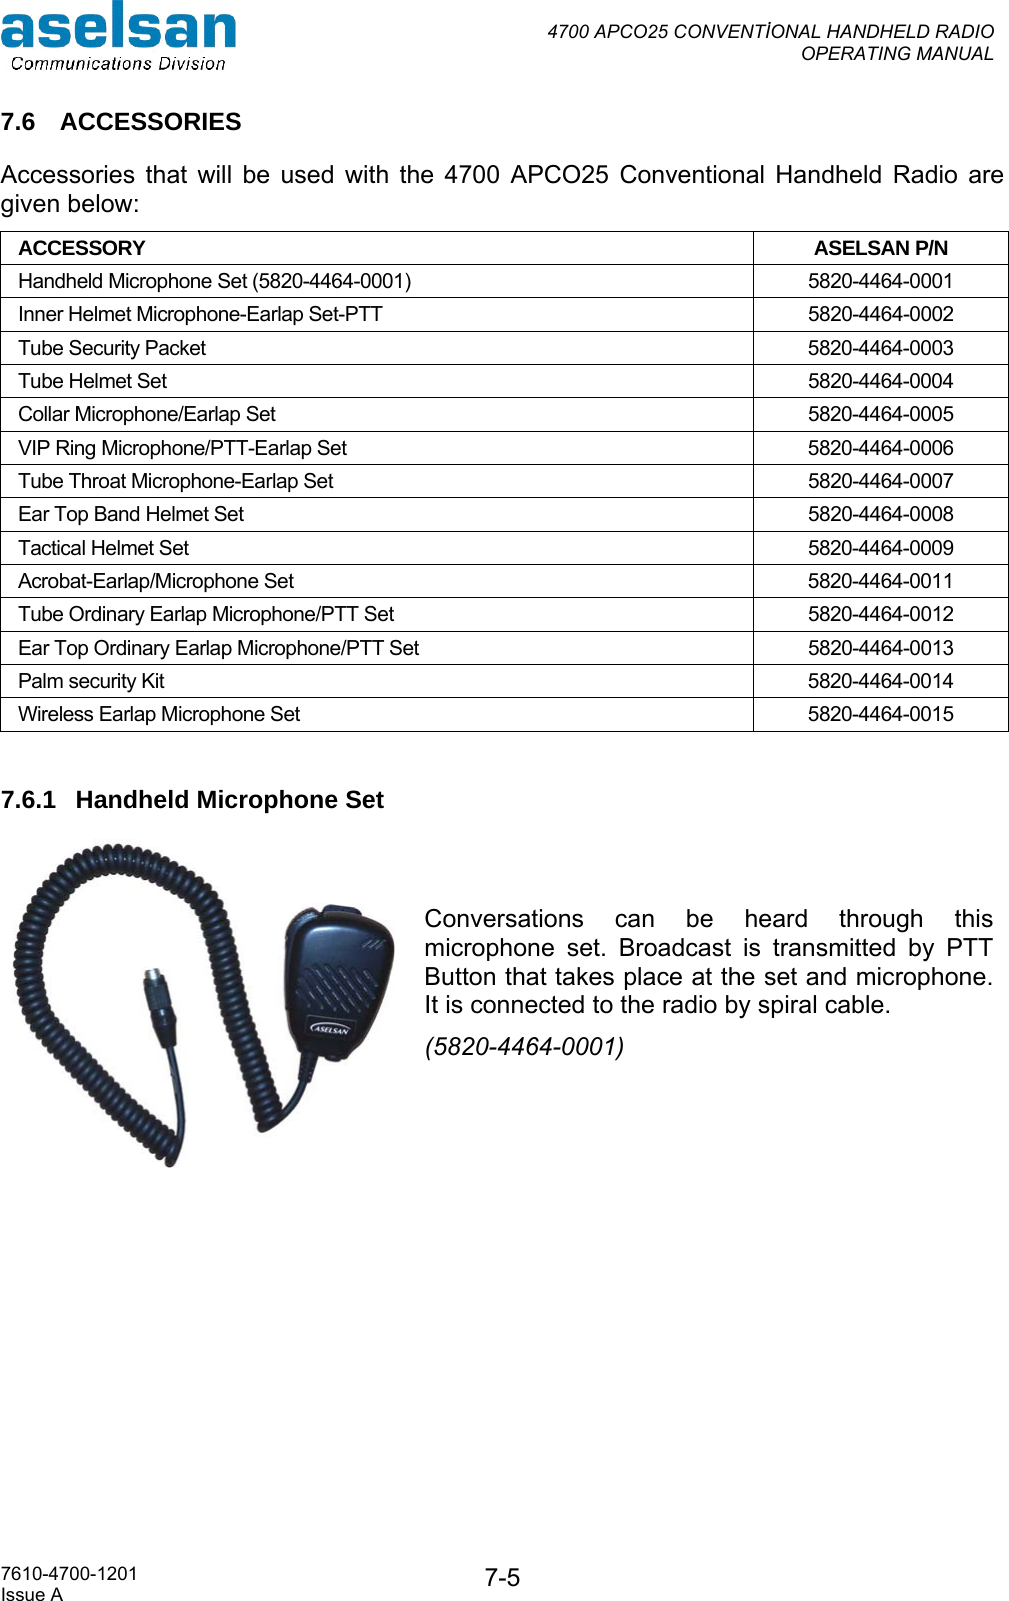  4700 APCO25 CONVENTİONAL HANDHELD RADIO  OPERATING MANUAL   7610-4700-1201 Issue A  7-57.6 ACCESSORIES Accessories that will be used with the 4700 APCO25 Conventional Handheld Radio are given below: ACCESSORY ASELSAN P/N Handheld Microphone Set (5820-4464-0001)  5820-4464-0001 Inner Helmet Microphone-Earlap Set-PTT  5820-4464-0002 Tube Security Packet  5820-4464-0003 Tube Helmet Set  5820-4464-0004 Collar Microphone/Earlap Set  5820-4464-0005 VIP Ring Microphone/PTT-Earlap Set  5820-4464-0006 Tube Throat Microphone-Earlap Set  5820-4464-0007 Ear Top Band Helmet Set  5820-4464-0008 Tactical Helmet Set  5820-4464-0009 Acrobat-Earlap/Microphone Set  5820-4464-0011 Tube Ordinary Earlap Microphone/PTT Set  5820-4464-0012 Ear Top Ordinary Earlap Microphone/PTT Set  5820-4464-0013 Palm security Kit  5820-4464-0014 Wireless Earlap Microphone Set  5820-4464-0015  7.6.1 Handheld Microphone Set  Conversations can be heard through this microphone set. Broadcast is transmitted by PTT Button that takes place at the set and microphone. It is connected to the radio by spiral cable. (5820-4464-0001)  